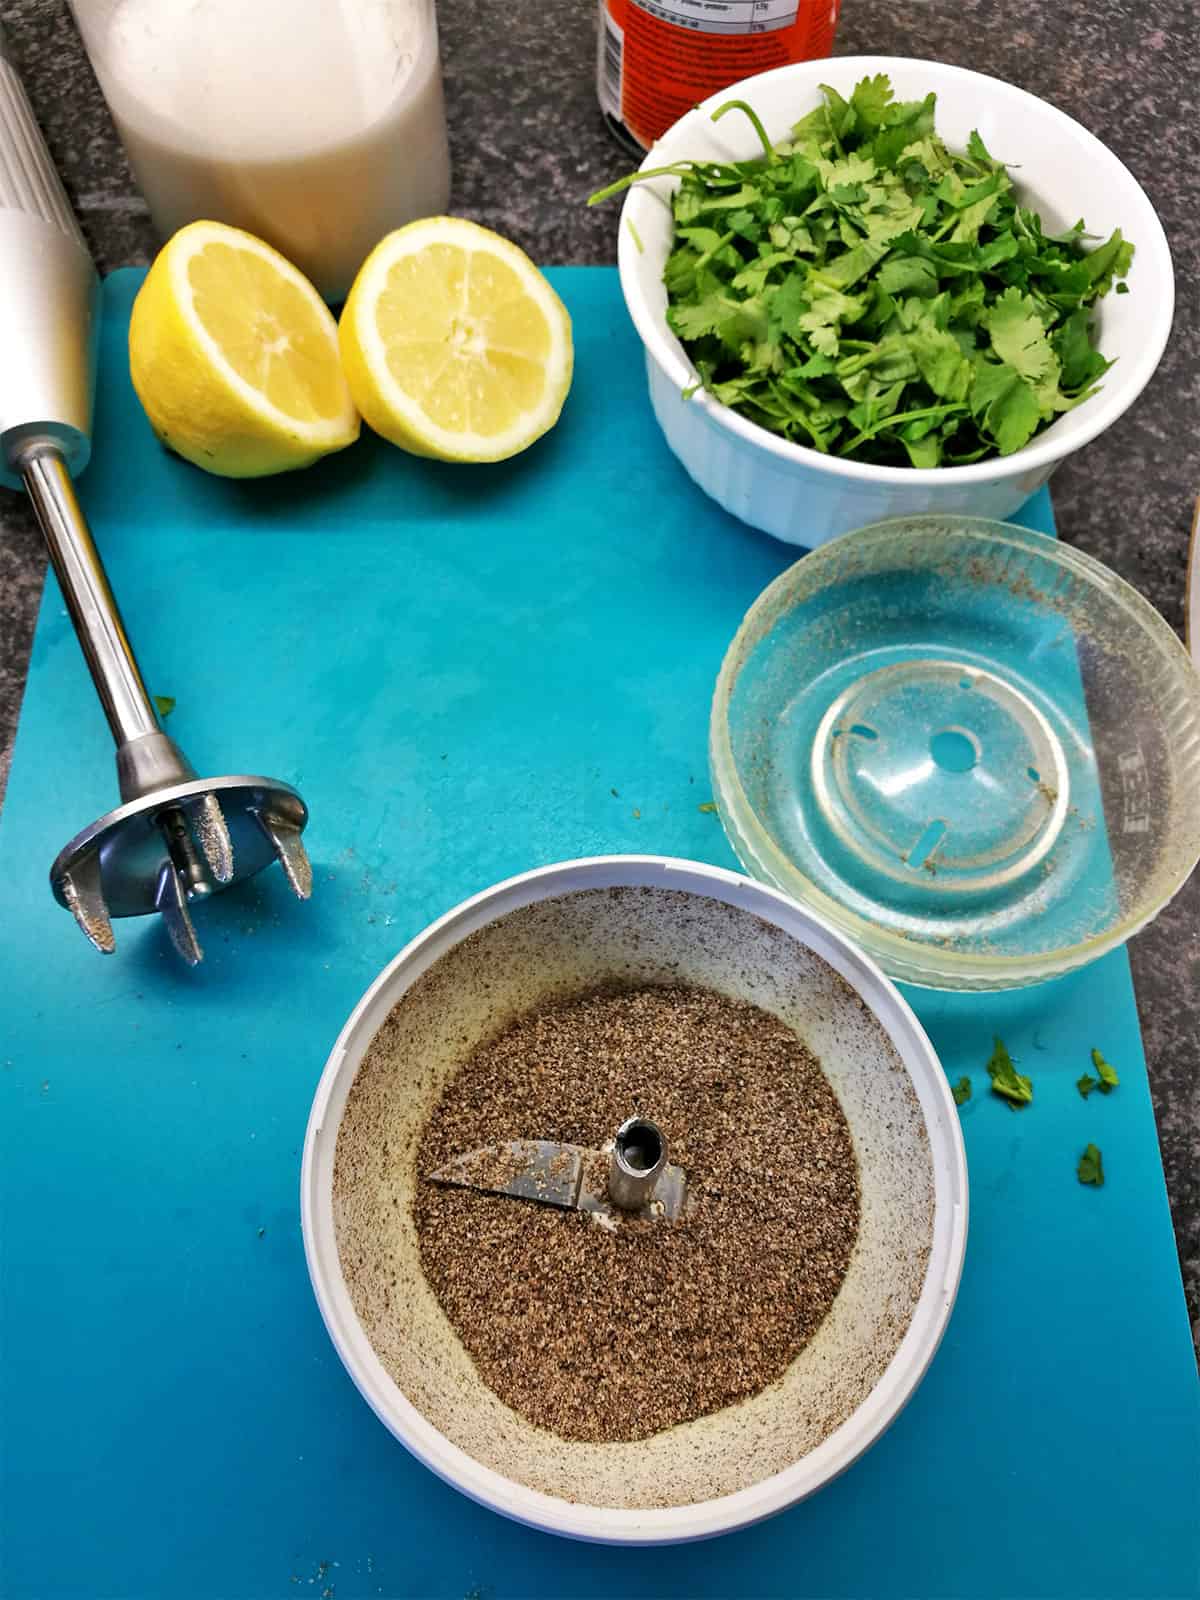 Ground flax seeds in a spice grinder with fresh cilantro, a cut lemon, and coconut milk.